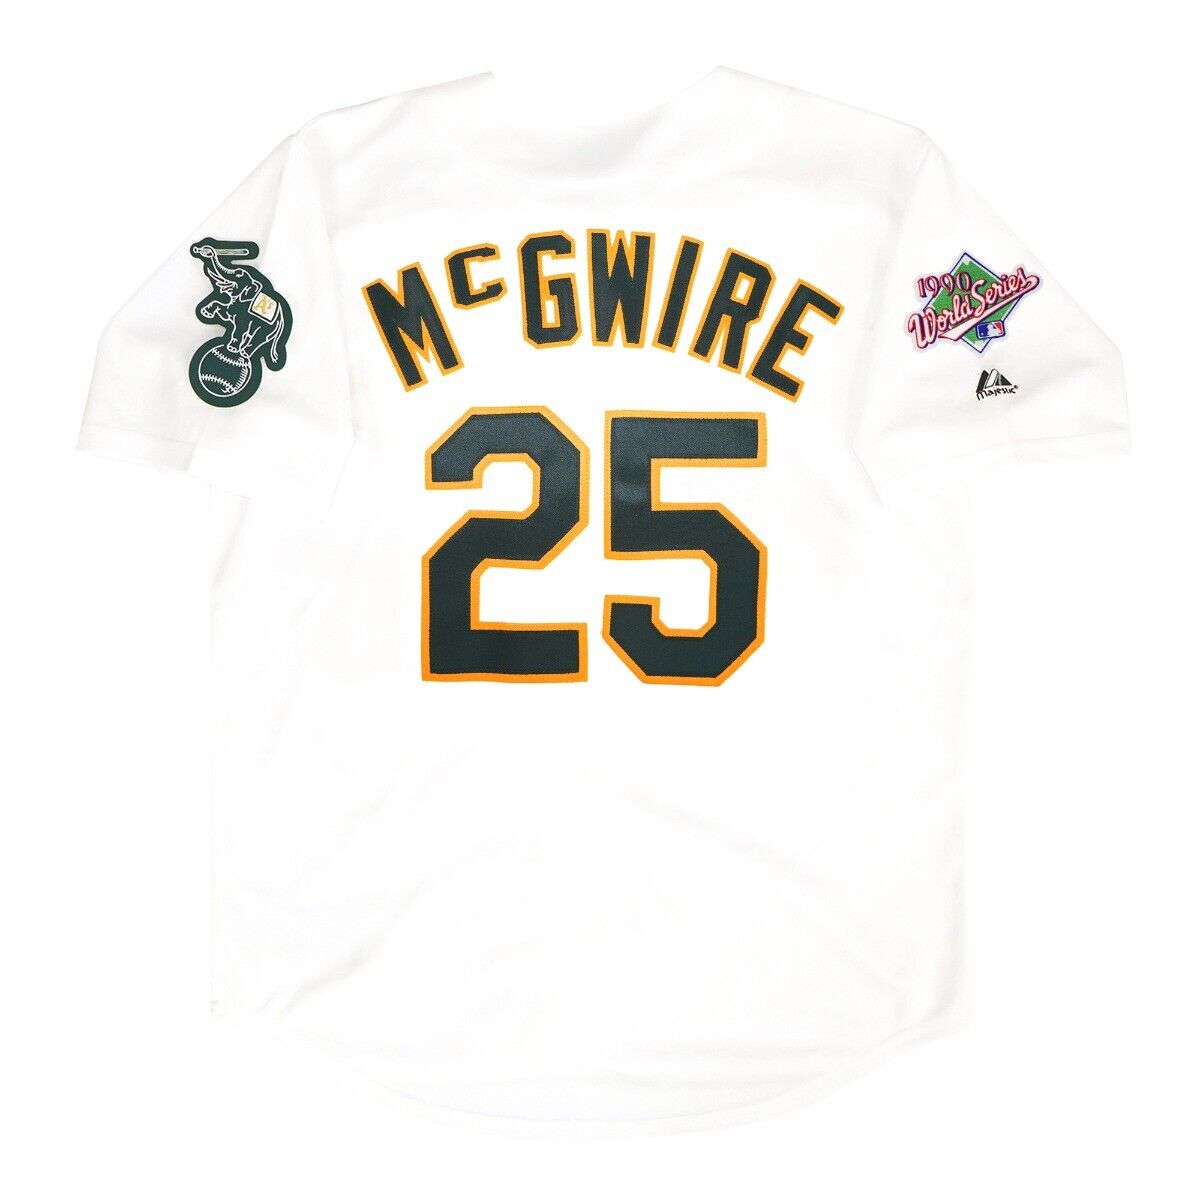 Mark McGwire Autograph Signing